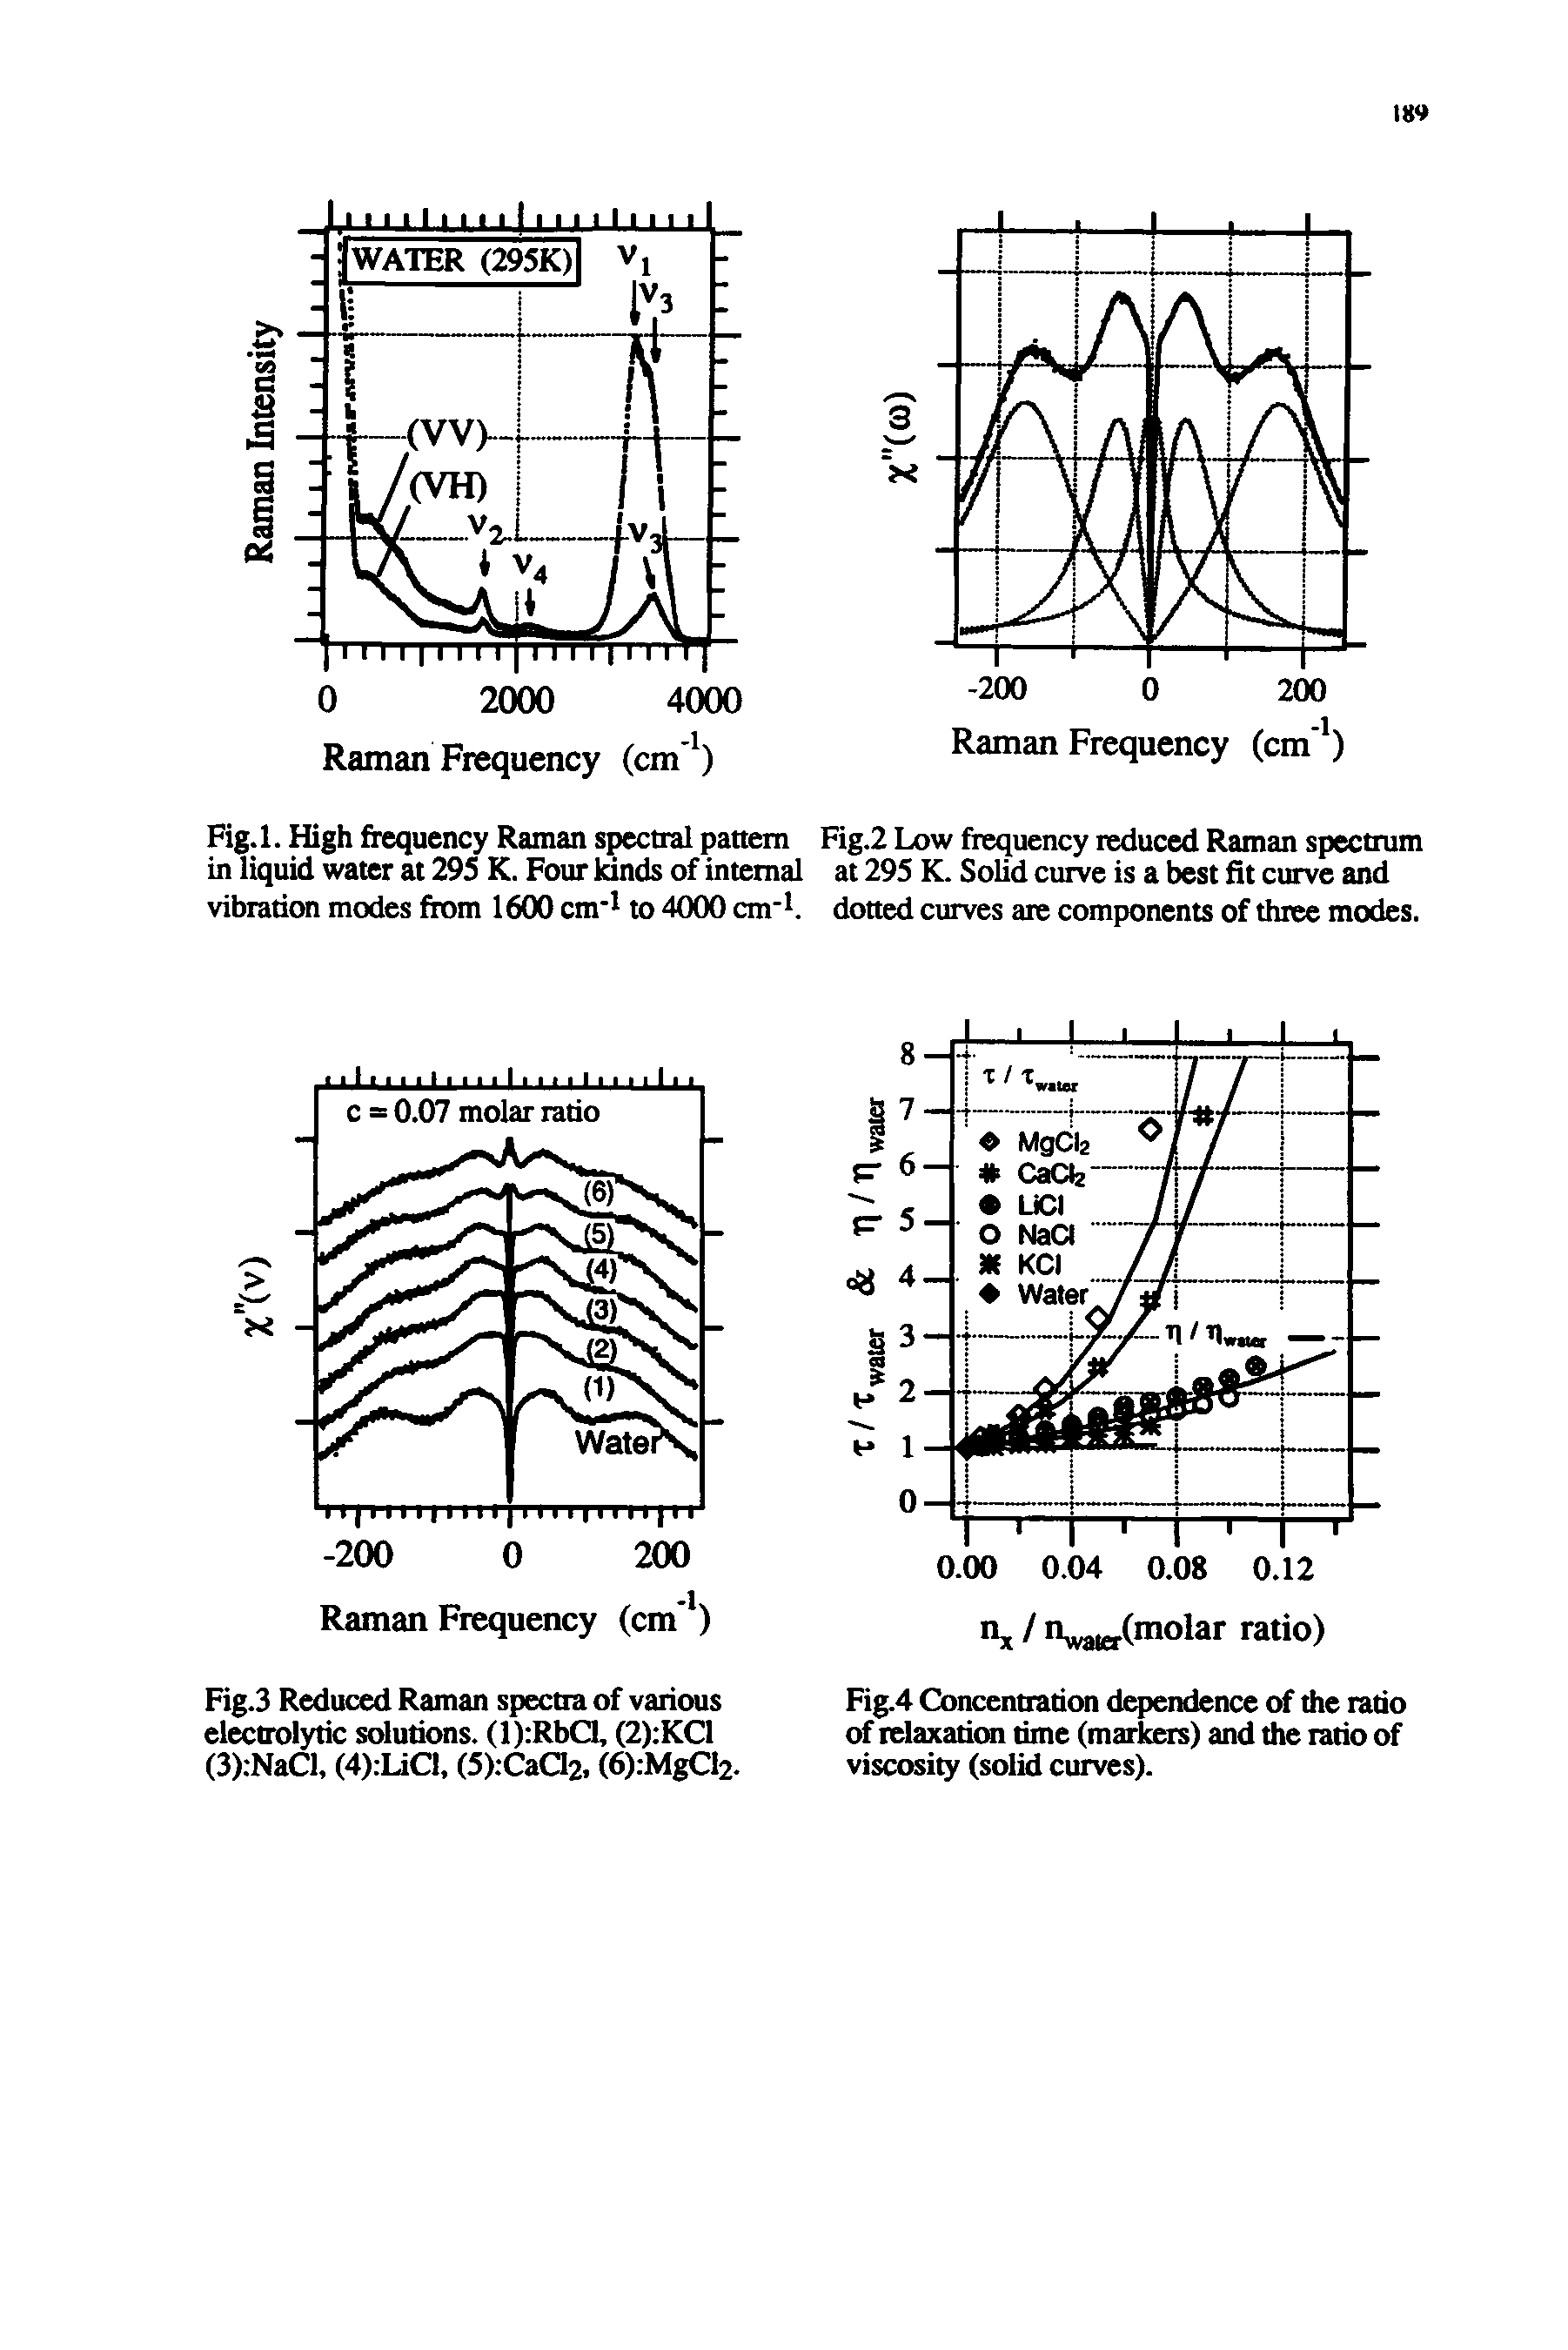 Fig.4 Concentration dependence of the ratio of relaxatitm time (markers) and the ratio of viscosity (solid curves).